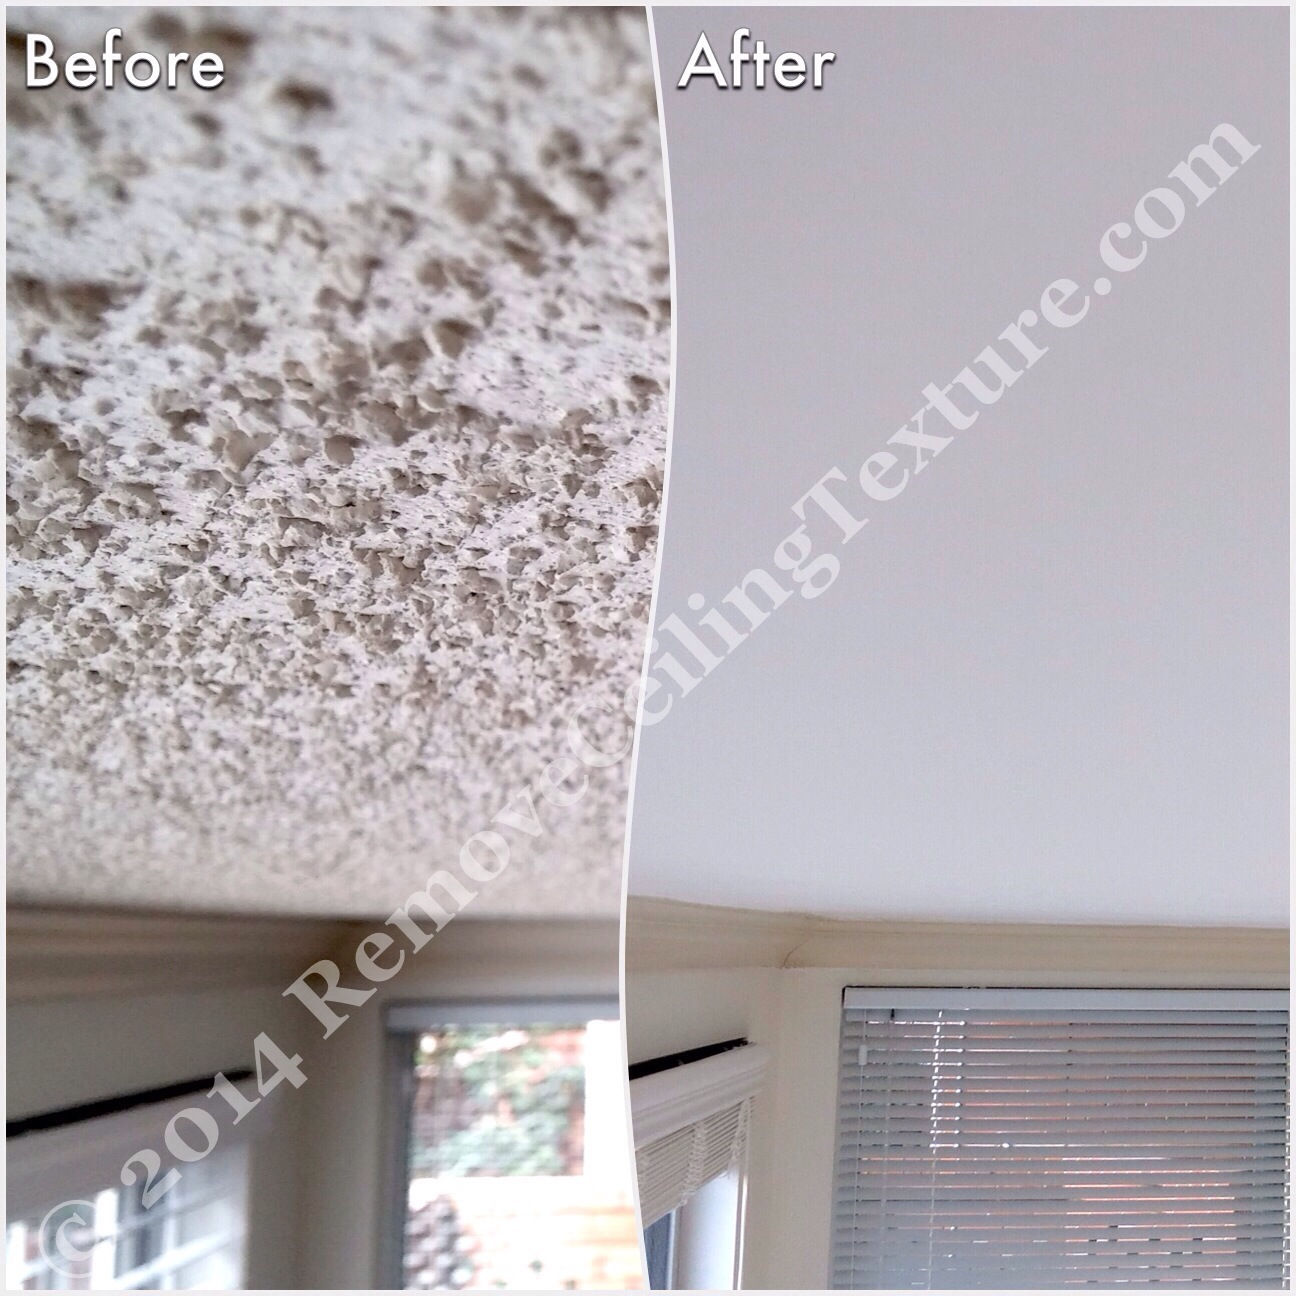 This condo at 518 Moberly Rd in Vancouver had the textured ceilings removed